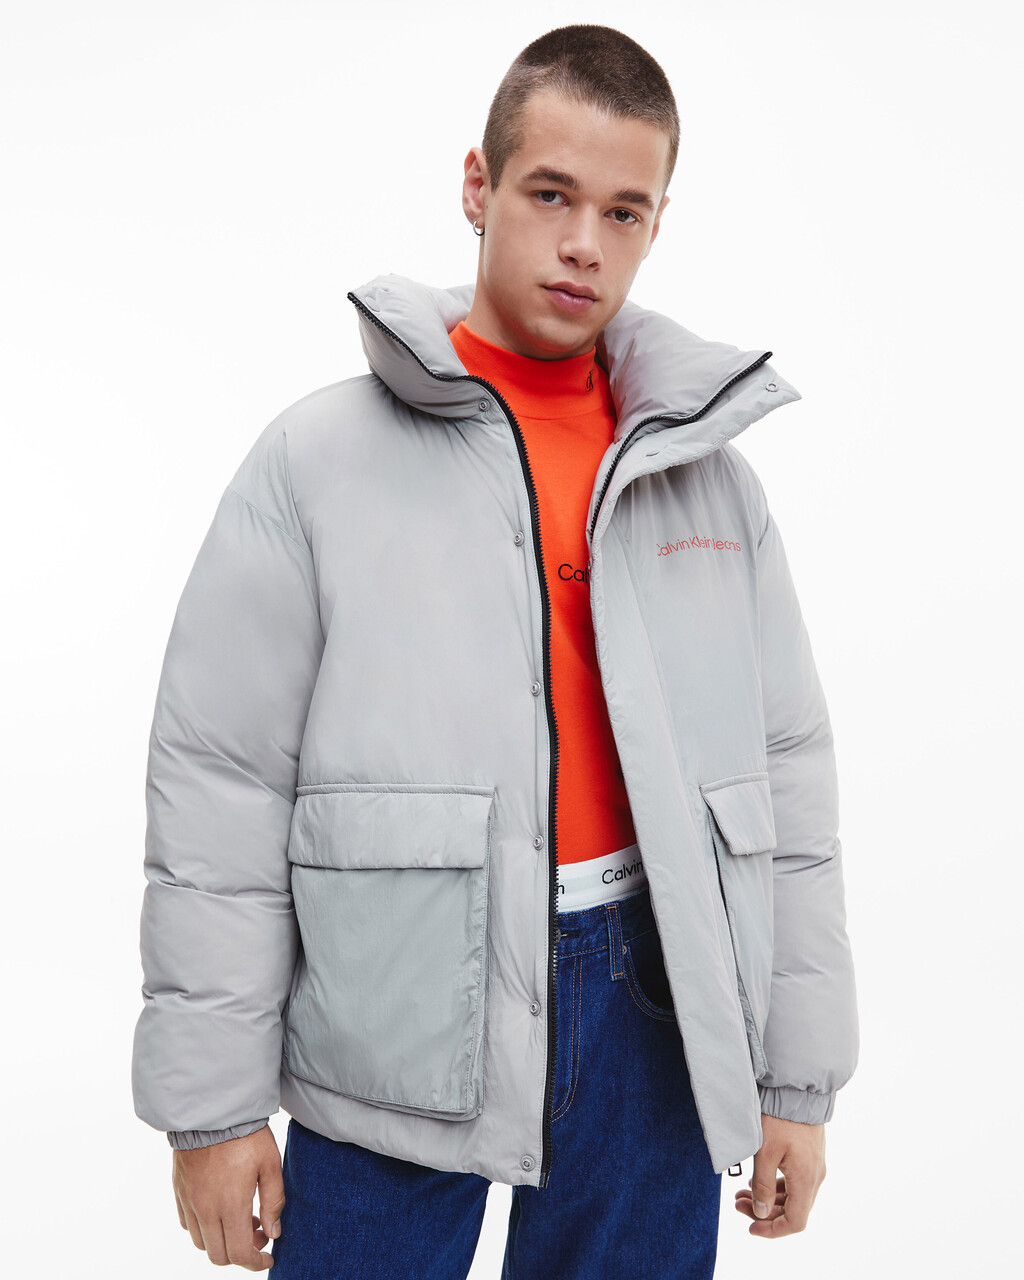 Quilted Puffer Jacket With Removable Sleeves, Mercury Grey, hi-res